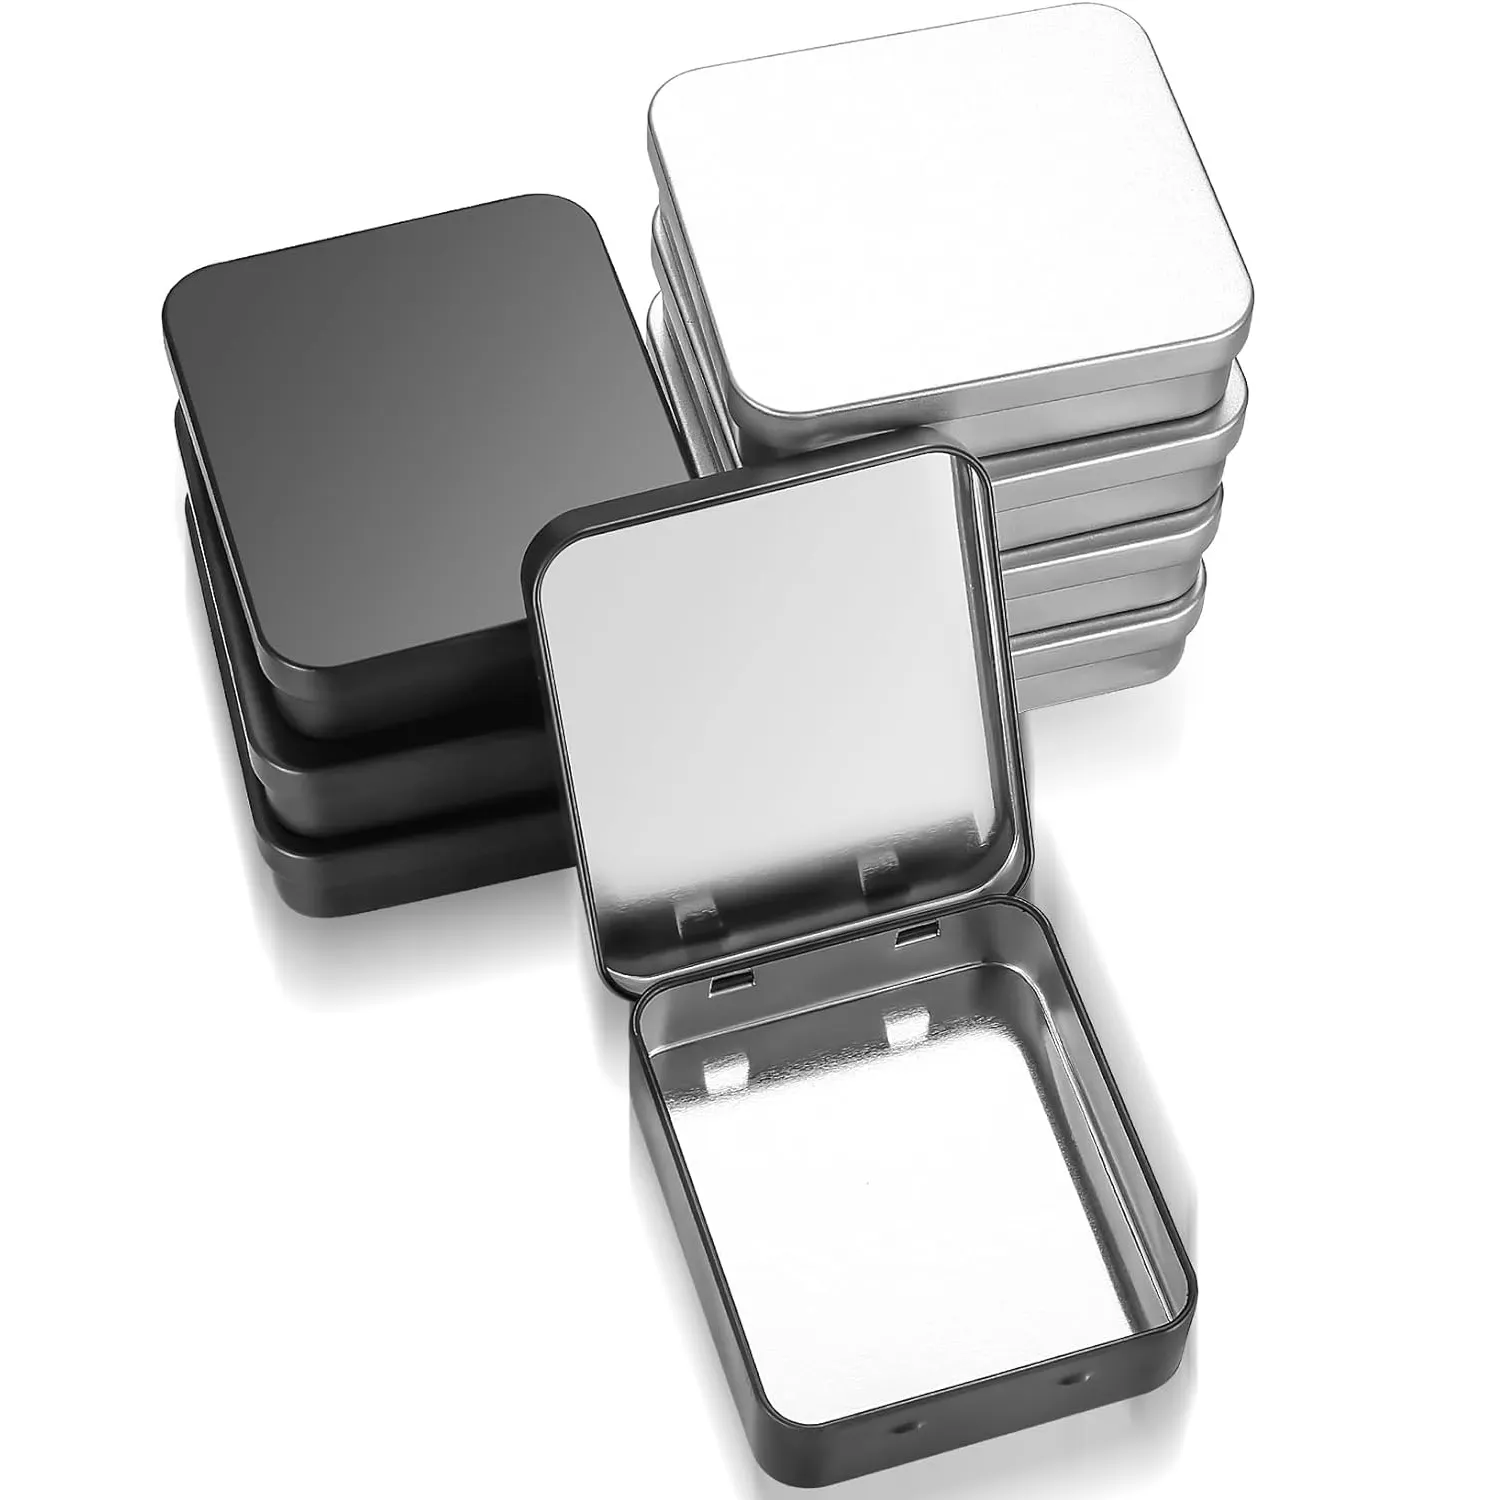 Rectangular Small Tin Boxes Empty Hinged Tins with Lids Metal Storage Tin Box with Lid for Candy Key Earring Coin Organizer